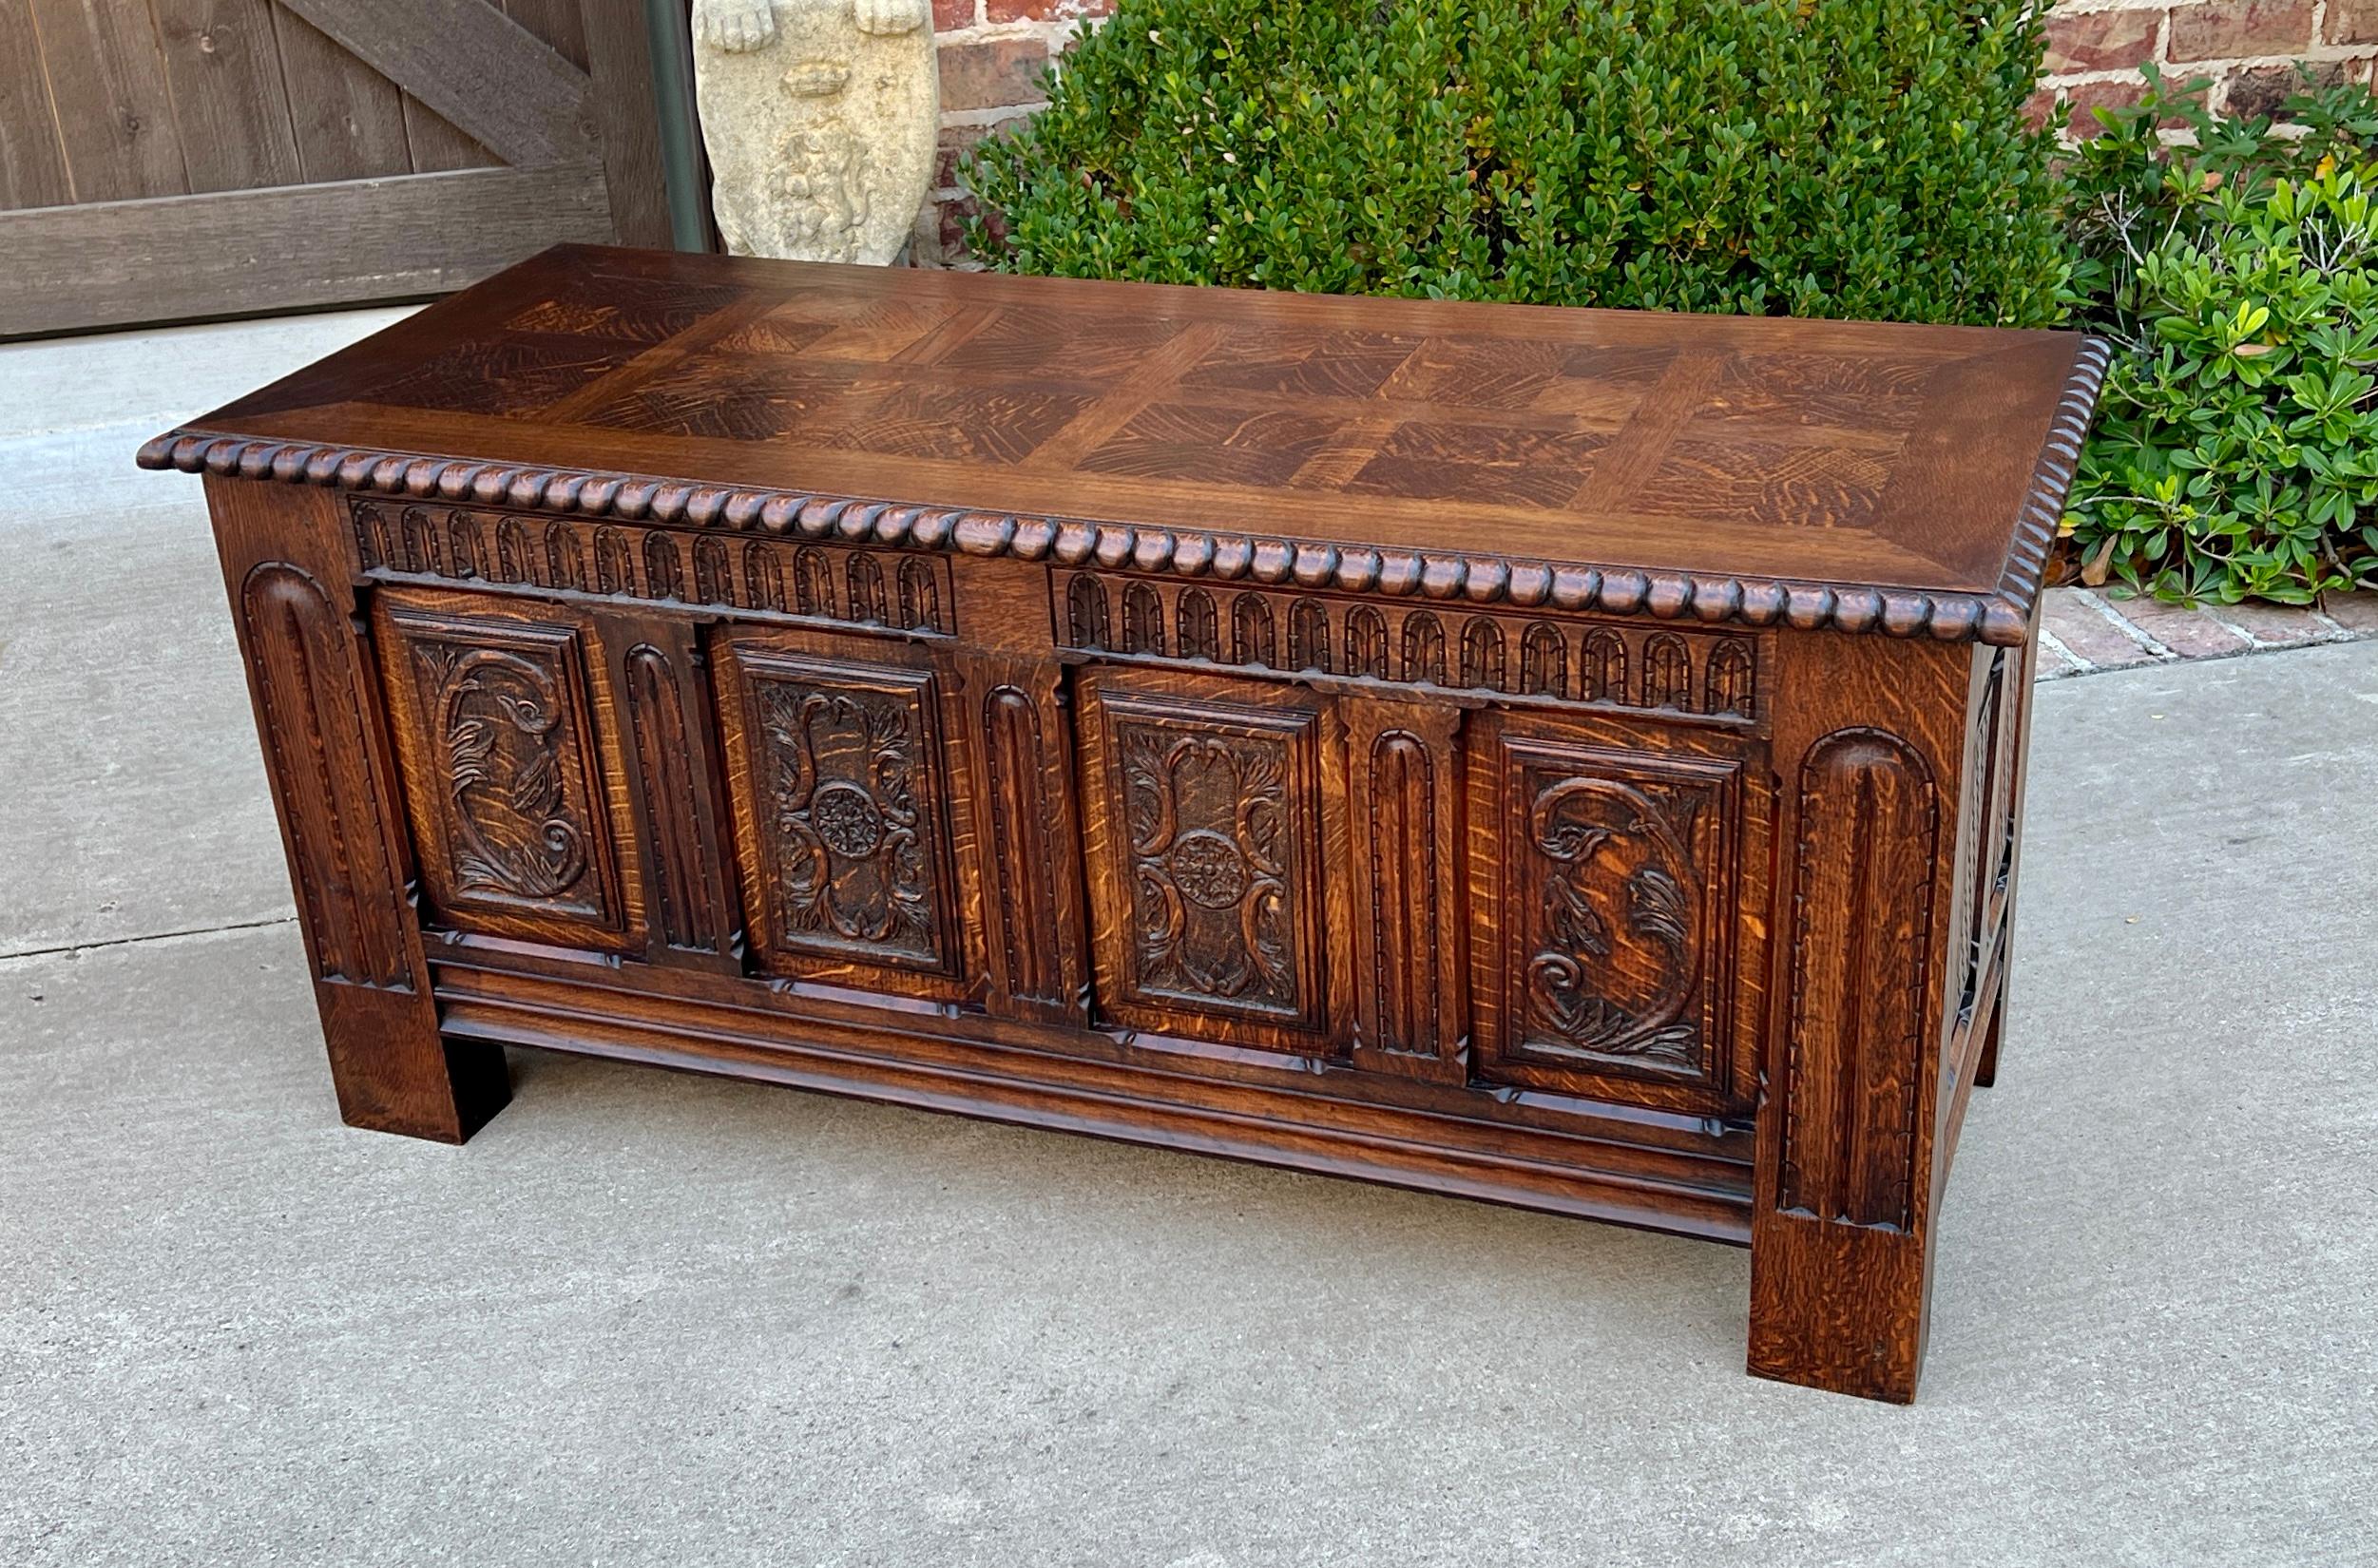 Renaissance Revival Antique French Blanket Box Chest Trunk Coffee Table Storage Chest Coffer Oak